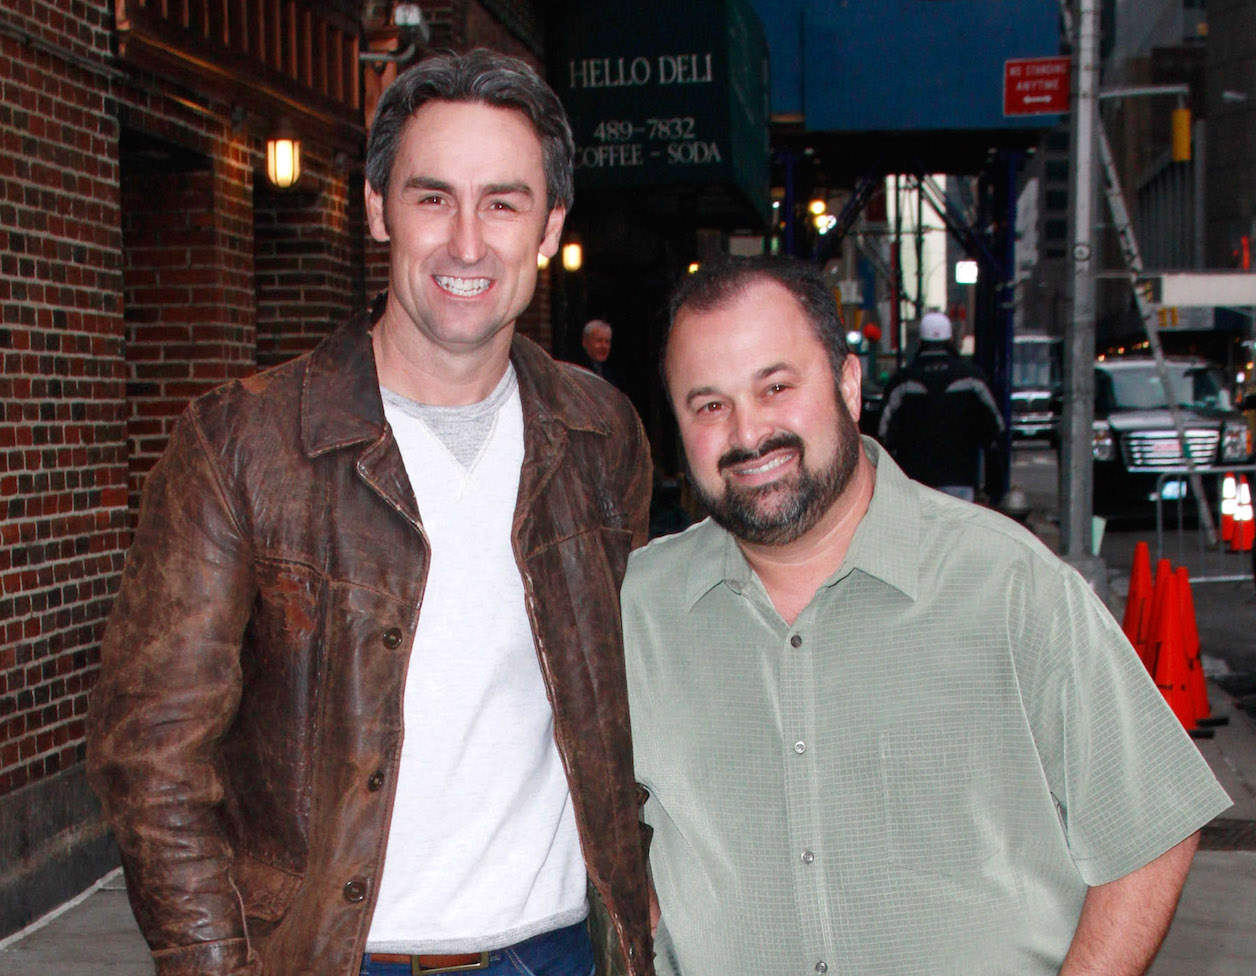 Mike Wolfe and Frank Fritz, the stars of 'American Pickers,' standing next to each other and smiling